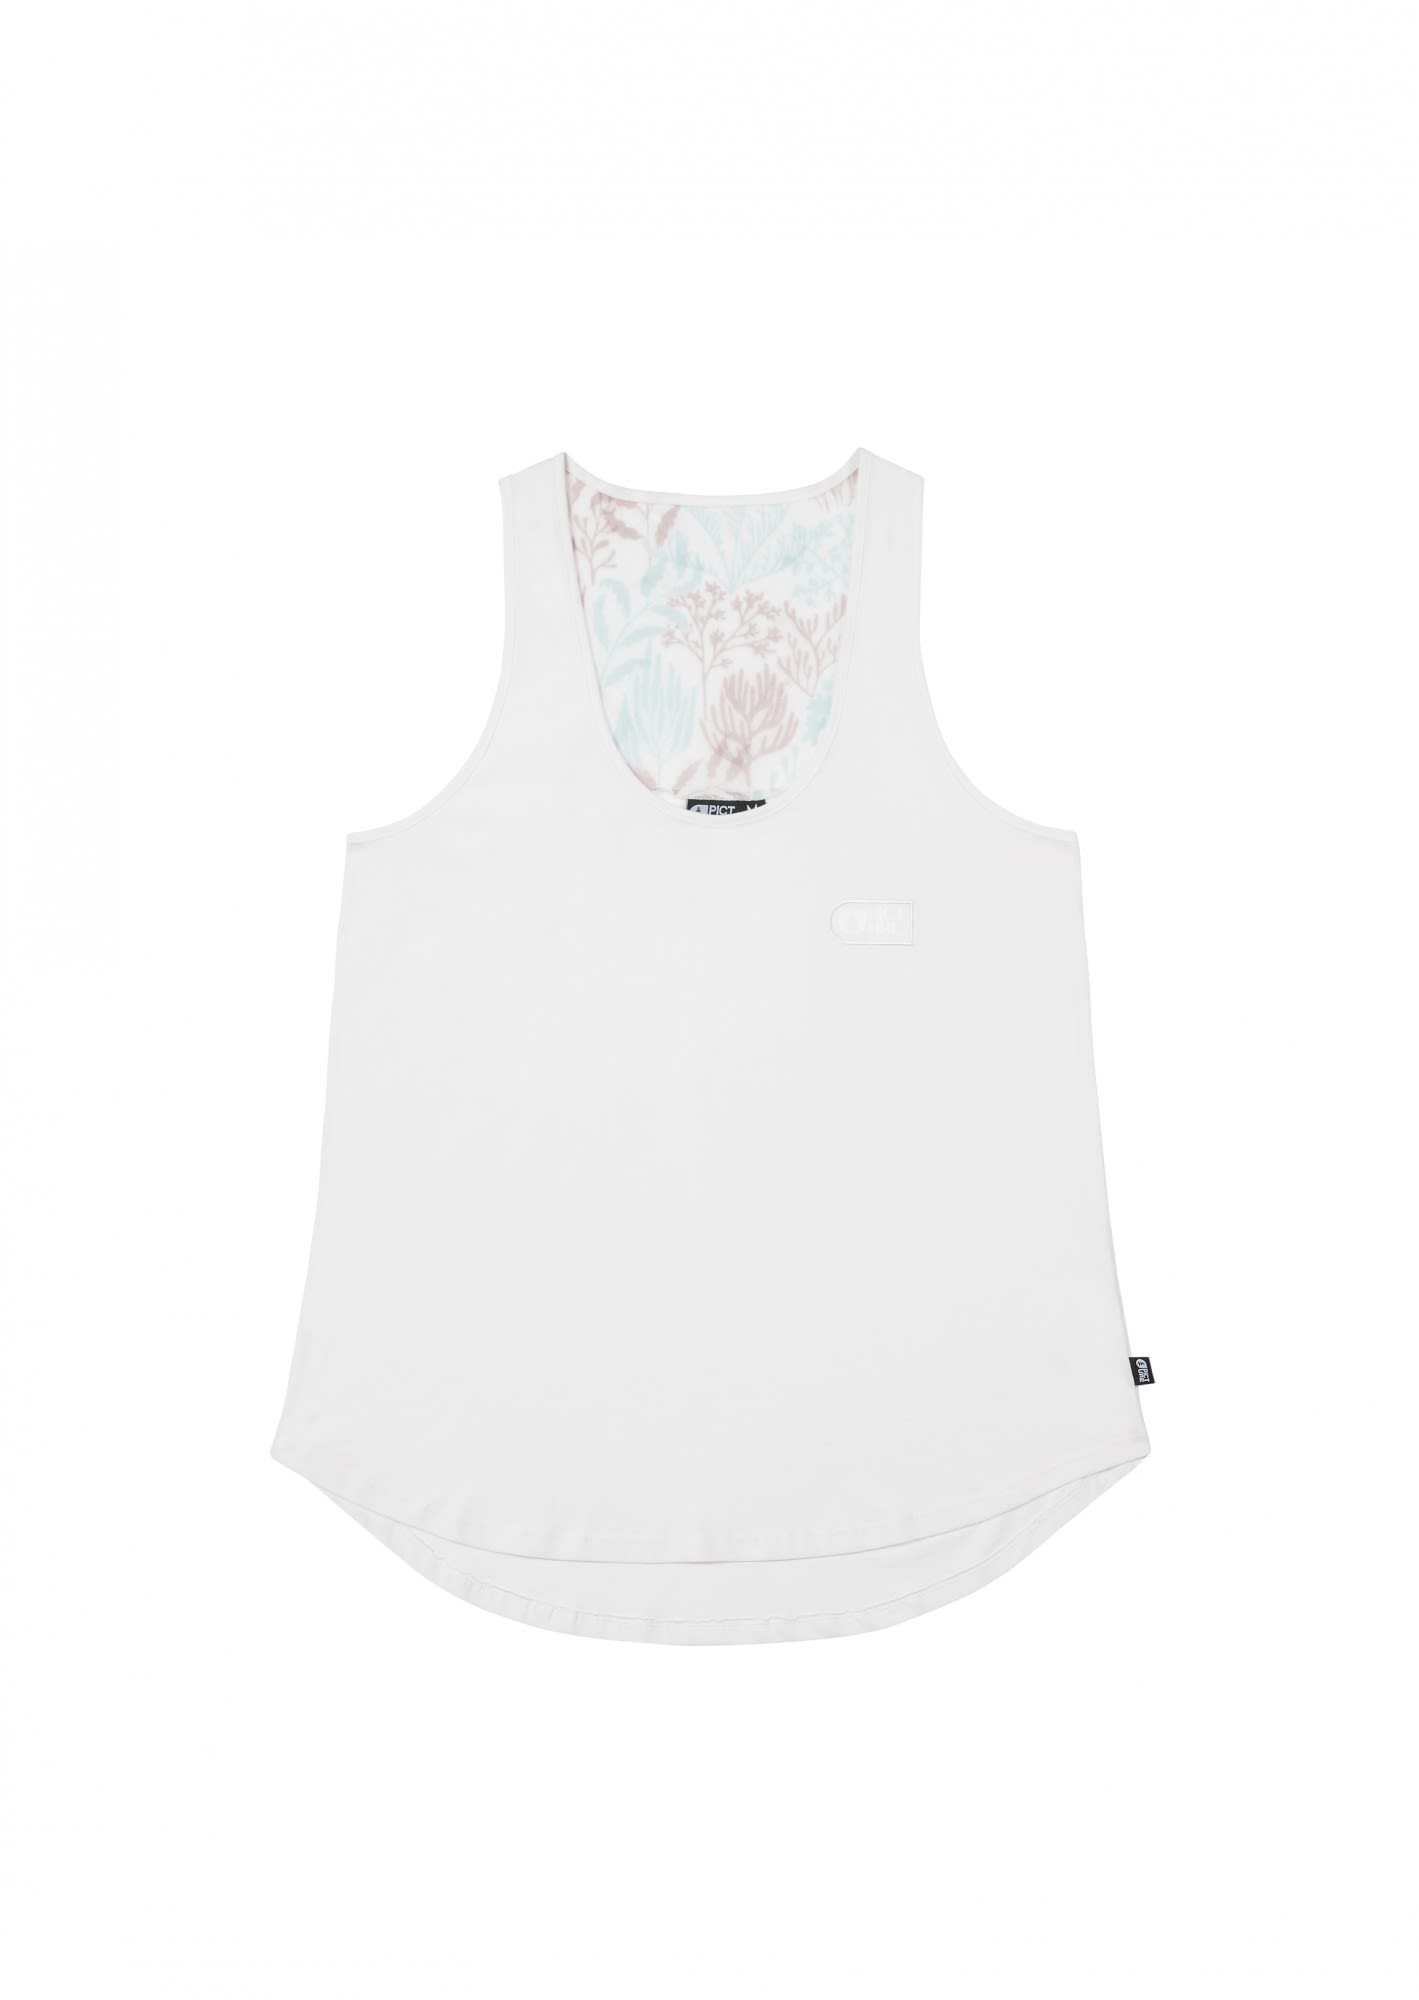 Picture Loni Tank Weiss- Female Tops - Ärmellose Shirts- Grösse S - Farbe White